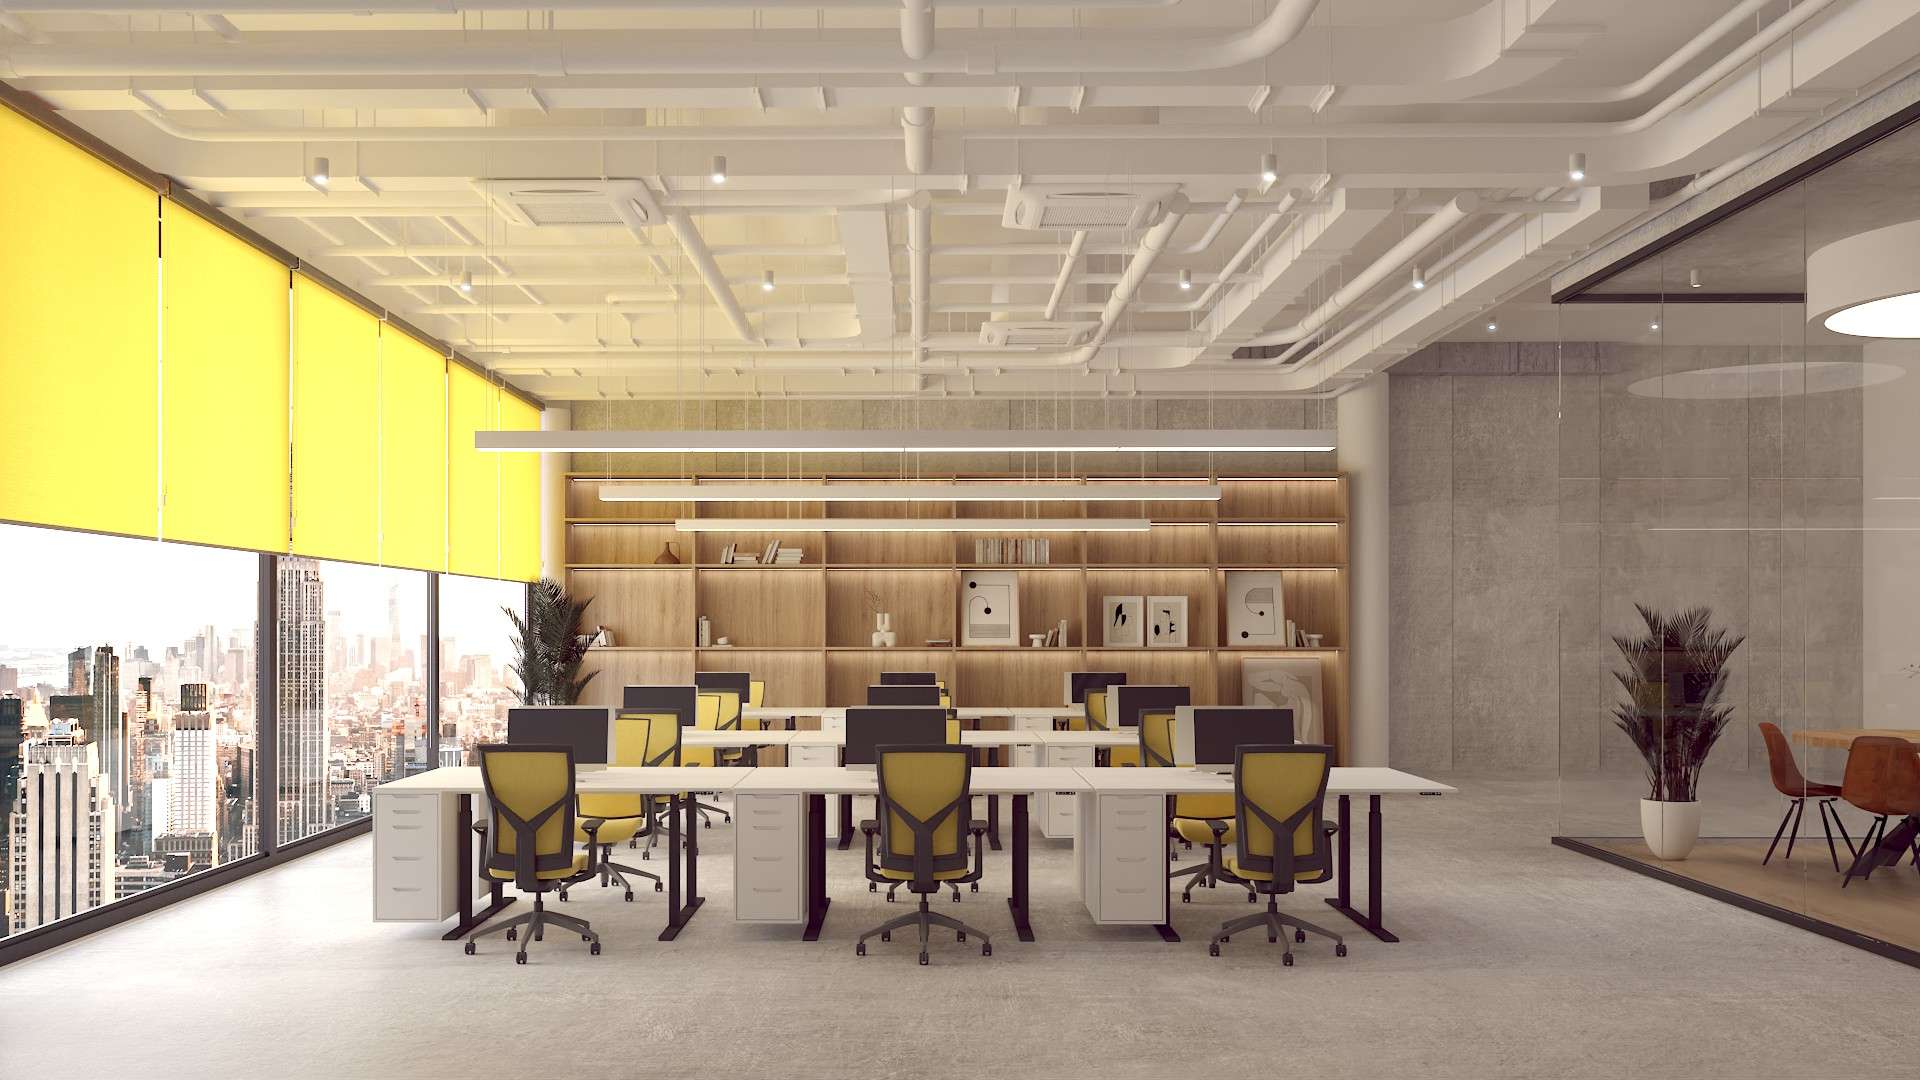 Modern office with yellow chairs, open floor plan, and large windows offering a panoramic city view. Design by Debora, an online interior design service based in New York City.